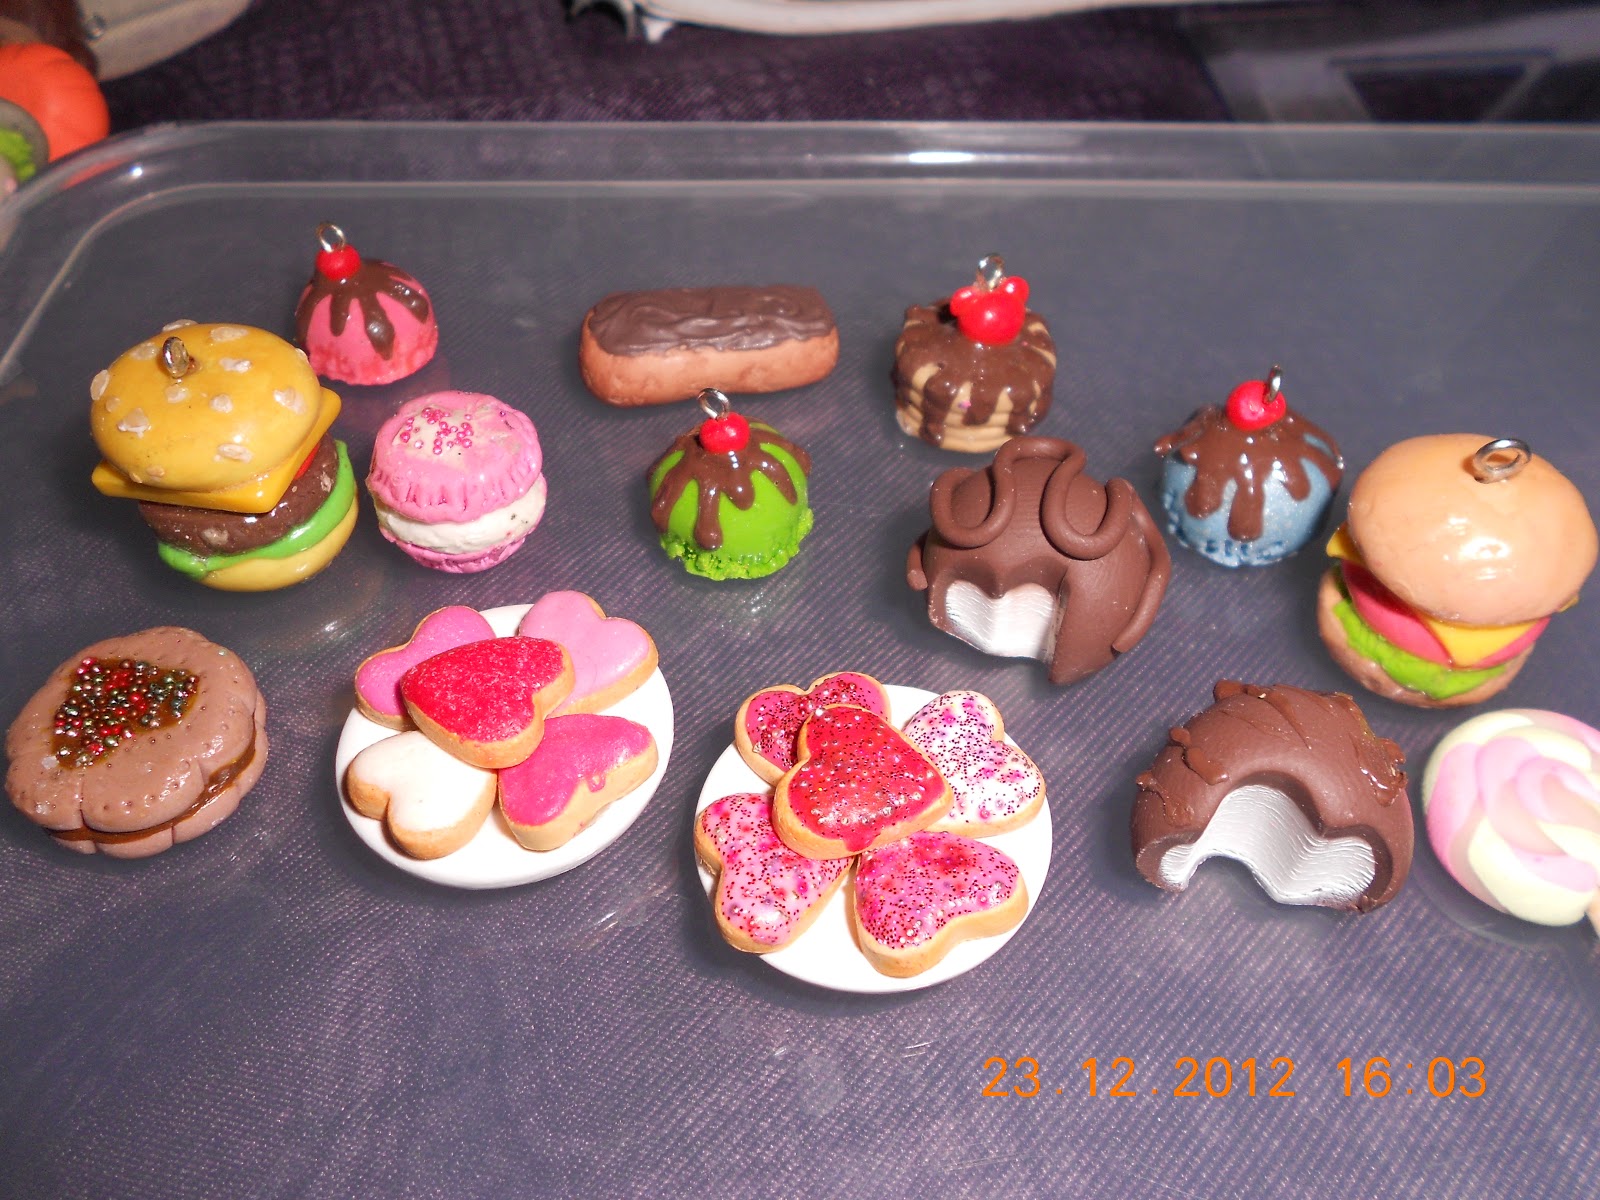 Kawaiimeetsstyle: My Polymer clay / Air dry Clay Creations ( Some Of Them )